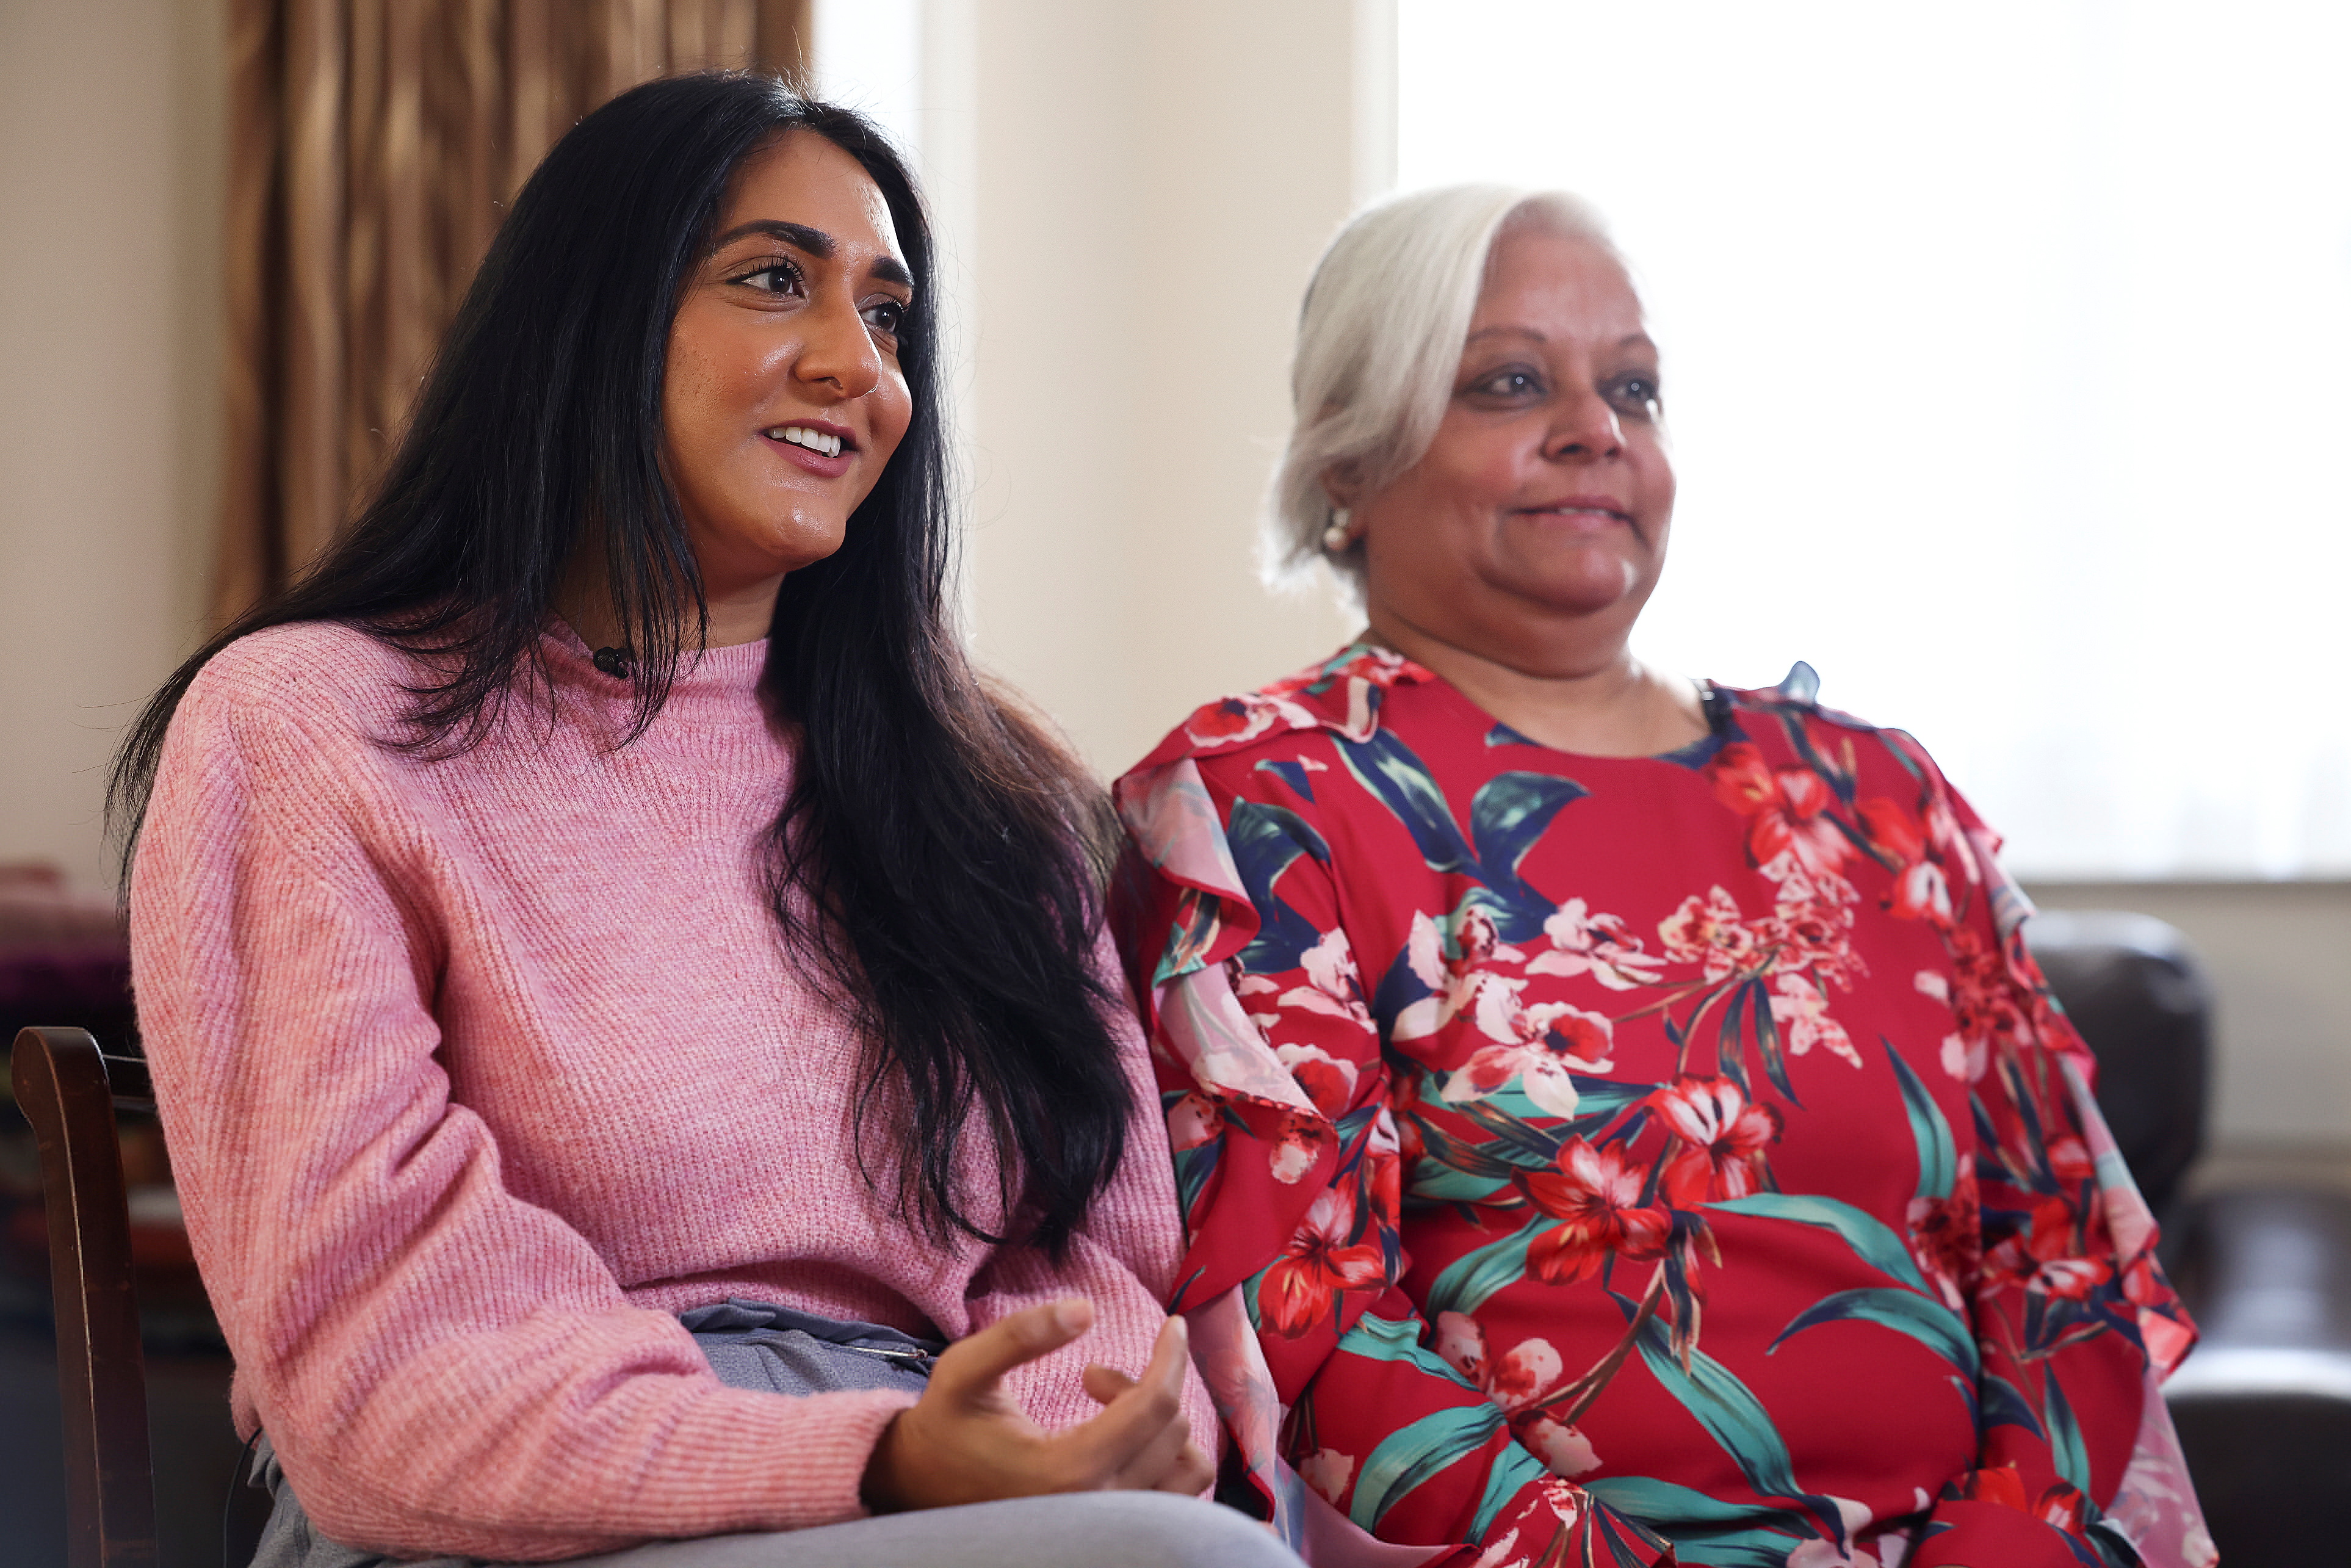 Bhavna Patel and her daughter Bindiya Patel, who are due to fly to New York to reunite with family following the relaxing of the coronavirus disease (COVID-19) travel restrictions, react during an interview with Reuters at their home in Croydon, Britain, November 5, 2021. REUTERS/Henry Nicholls